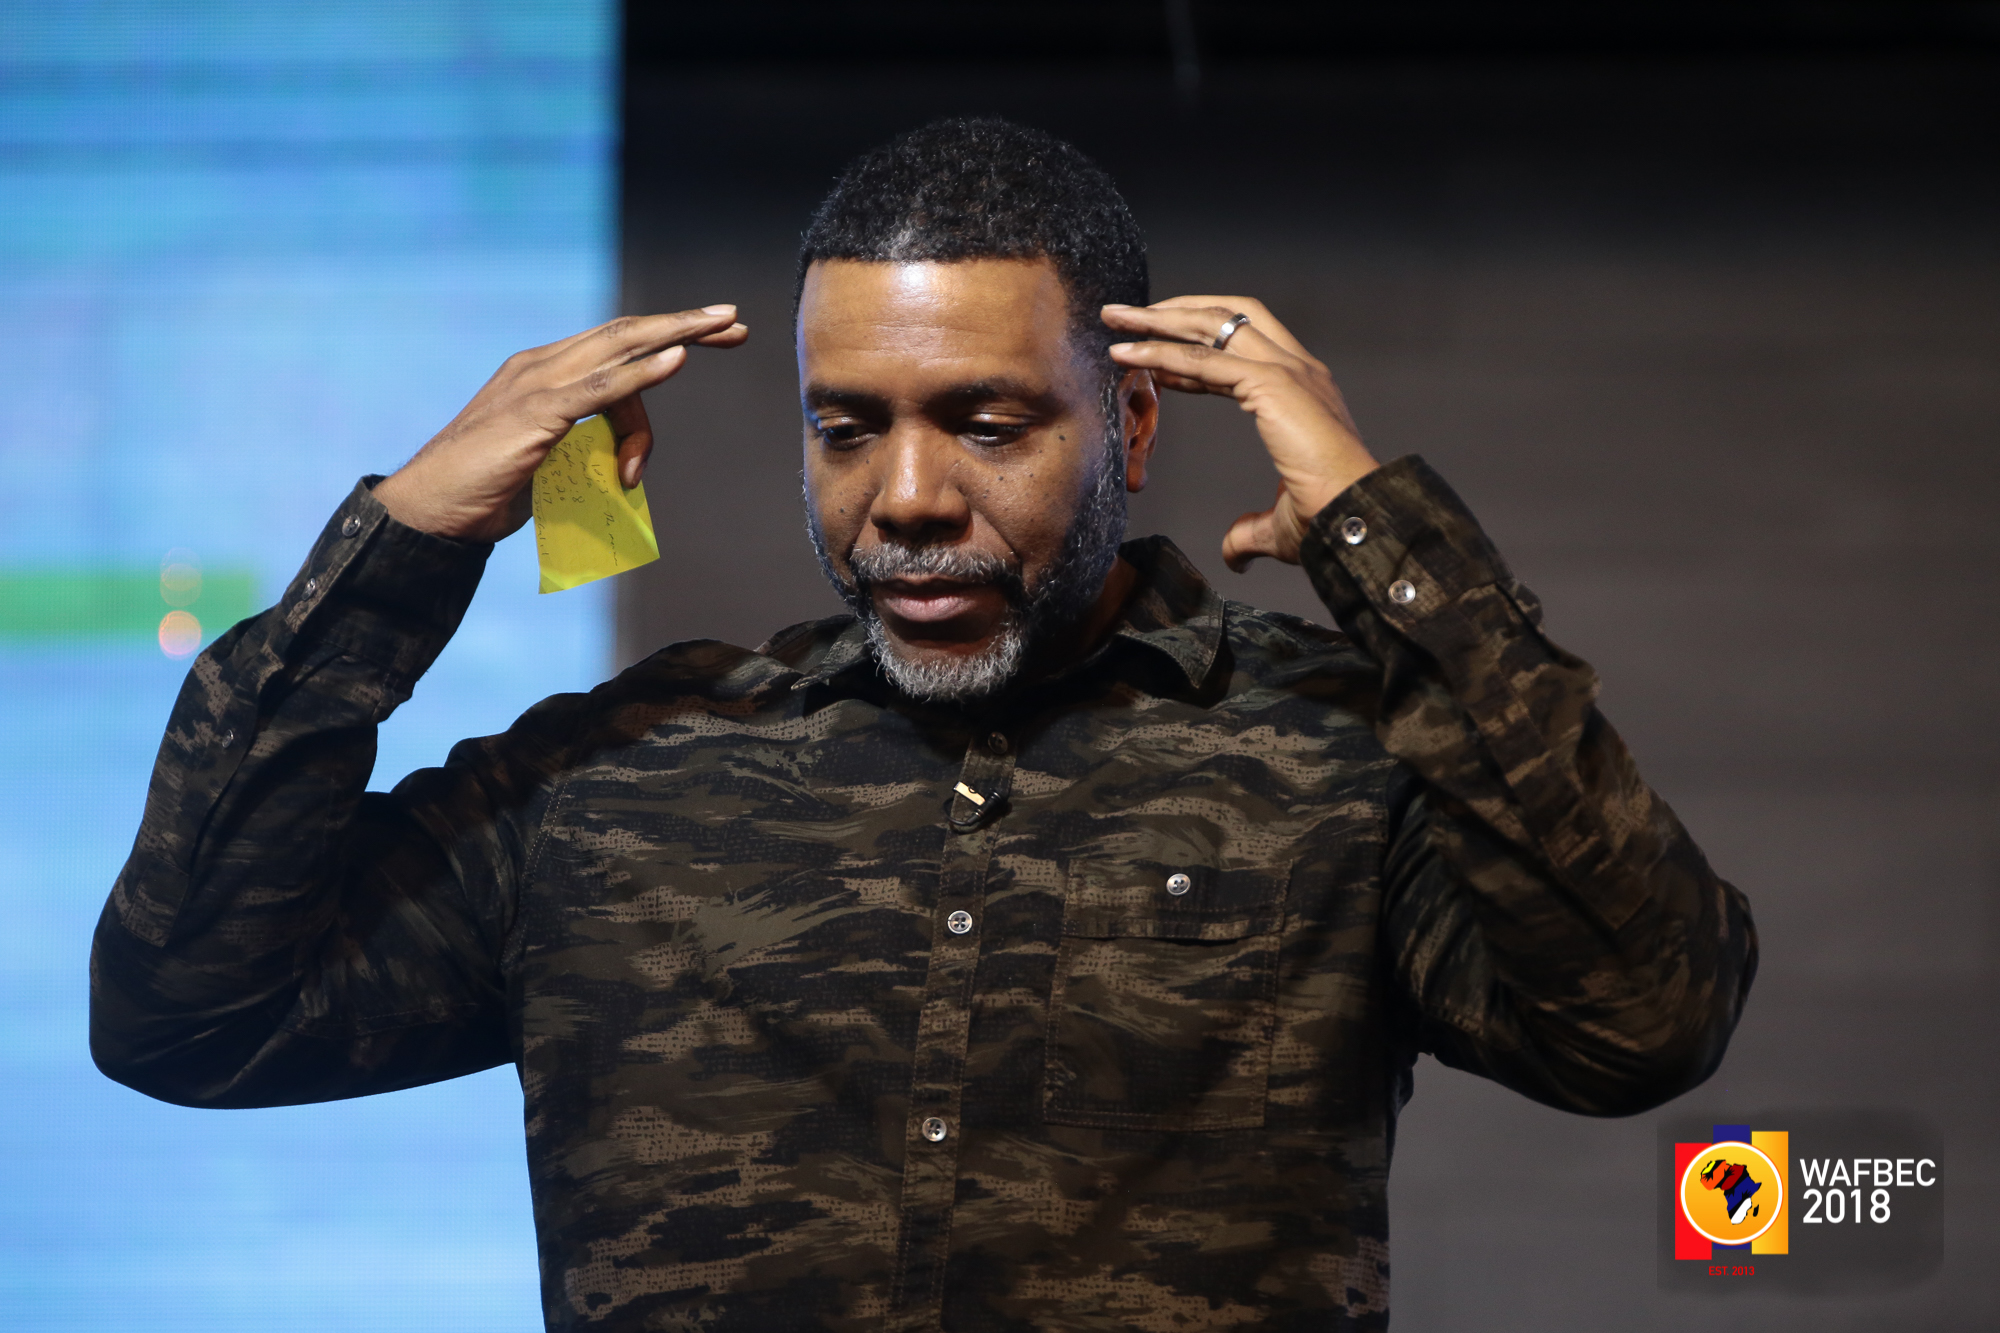 WAFBEC 2018 – Day 4 (Morning Session 2) with Dr. Creflo Dollar